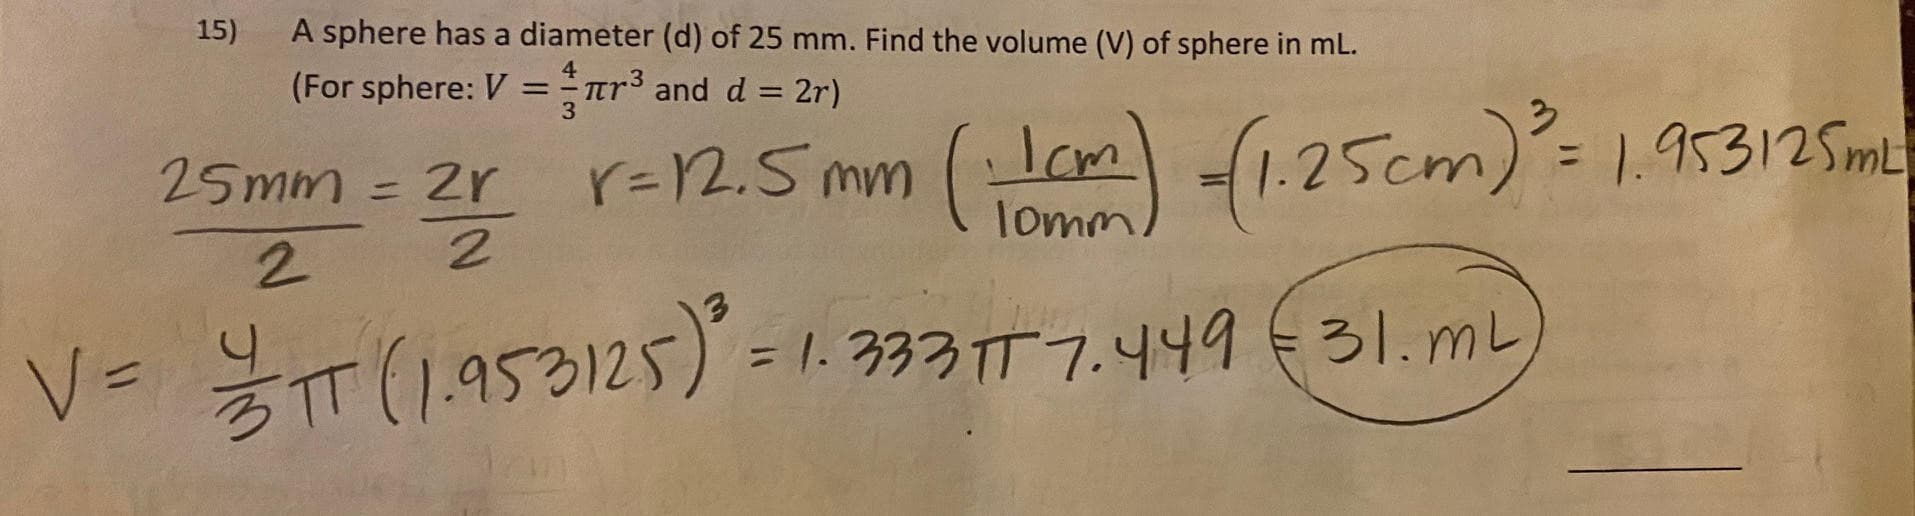 15)
A sphere has a diameter (d) of 25 mm. Find the volume (V) of sphere in mL.
(For sphere: V = r³ and d = 2r)
3.
25mm = 2r r=25mm (Lom) (1.25cm): 19
r=2.5 mm
%3D
%3D
lomm
2.
T(1.953125) = 1. 333TT 7.449€31. mL
